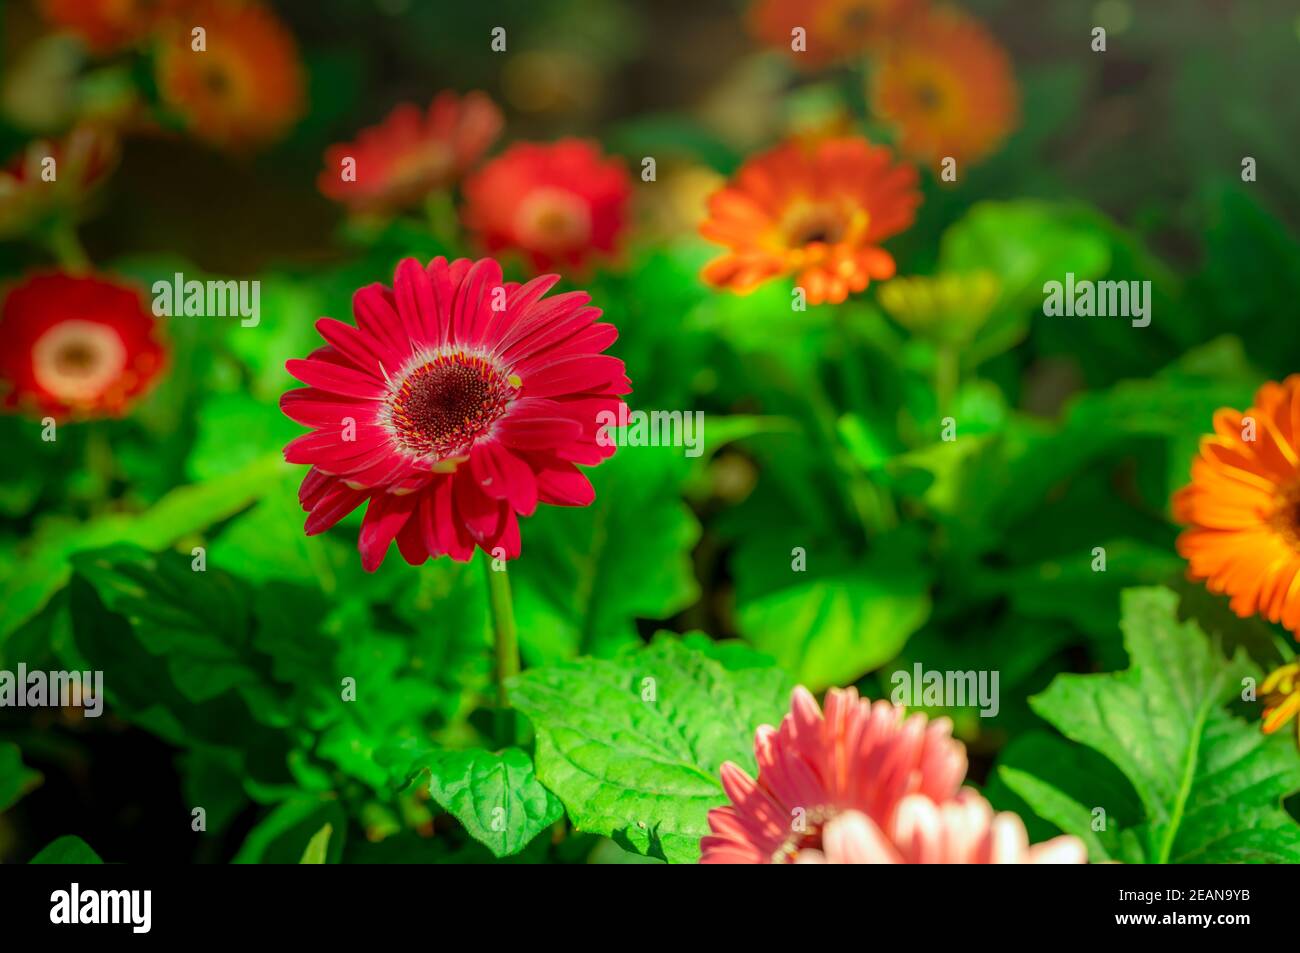 Red gerbera flower on blur background of orange and pink gerbera flowers in garden. Decorative garden plant or as cut flowers. Gentle red petals of gerbera. Floral garden with sunlight. Nature closeup Stock Photo